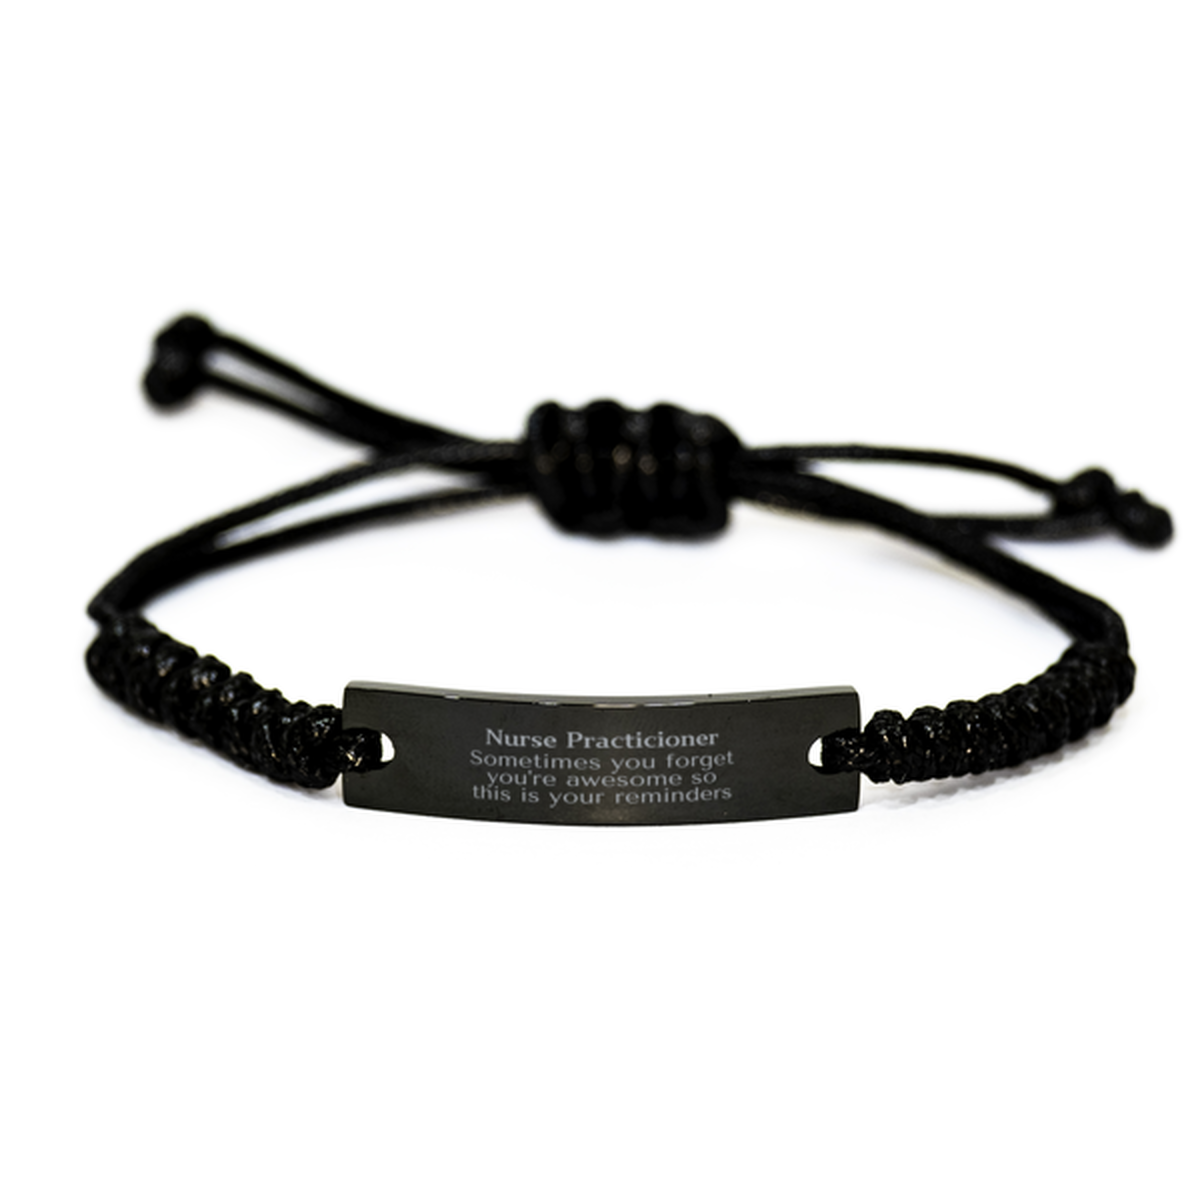 Sentimental Nurse Practicioner Black Rope Bracelet, Nurse Practicioner Sometimes you forget you're awesome so this is your reminders, Graduation Christmas Birthday Gifts for Nurse Practicioner, Men, Women, Coworkers